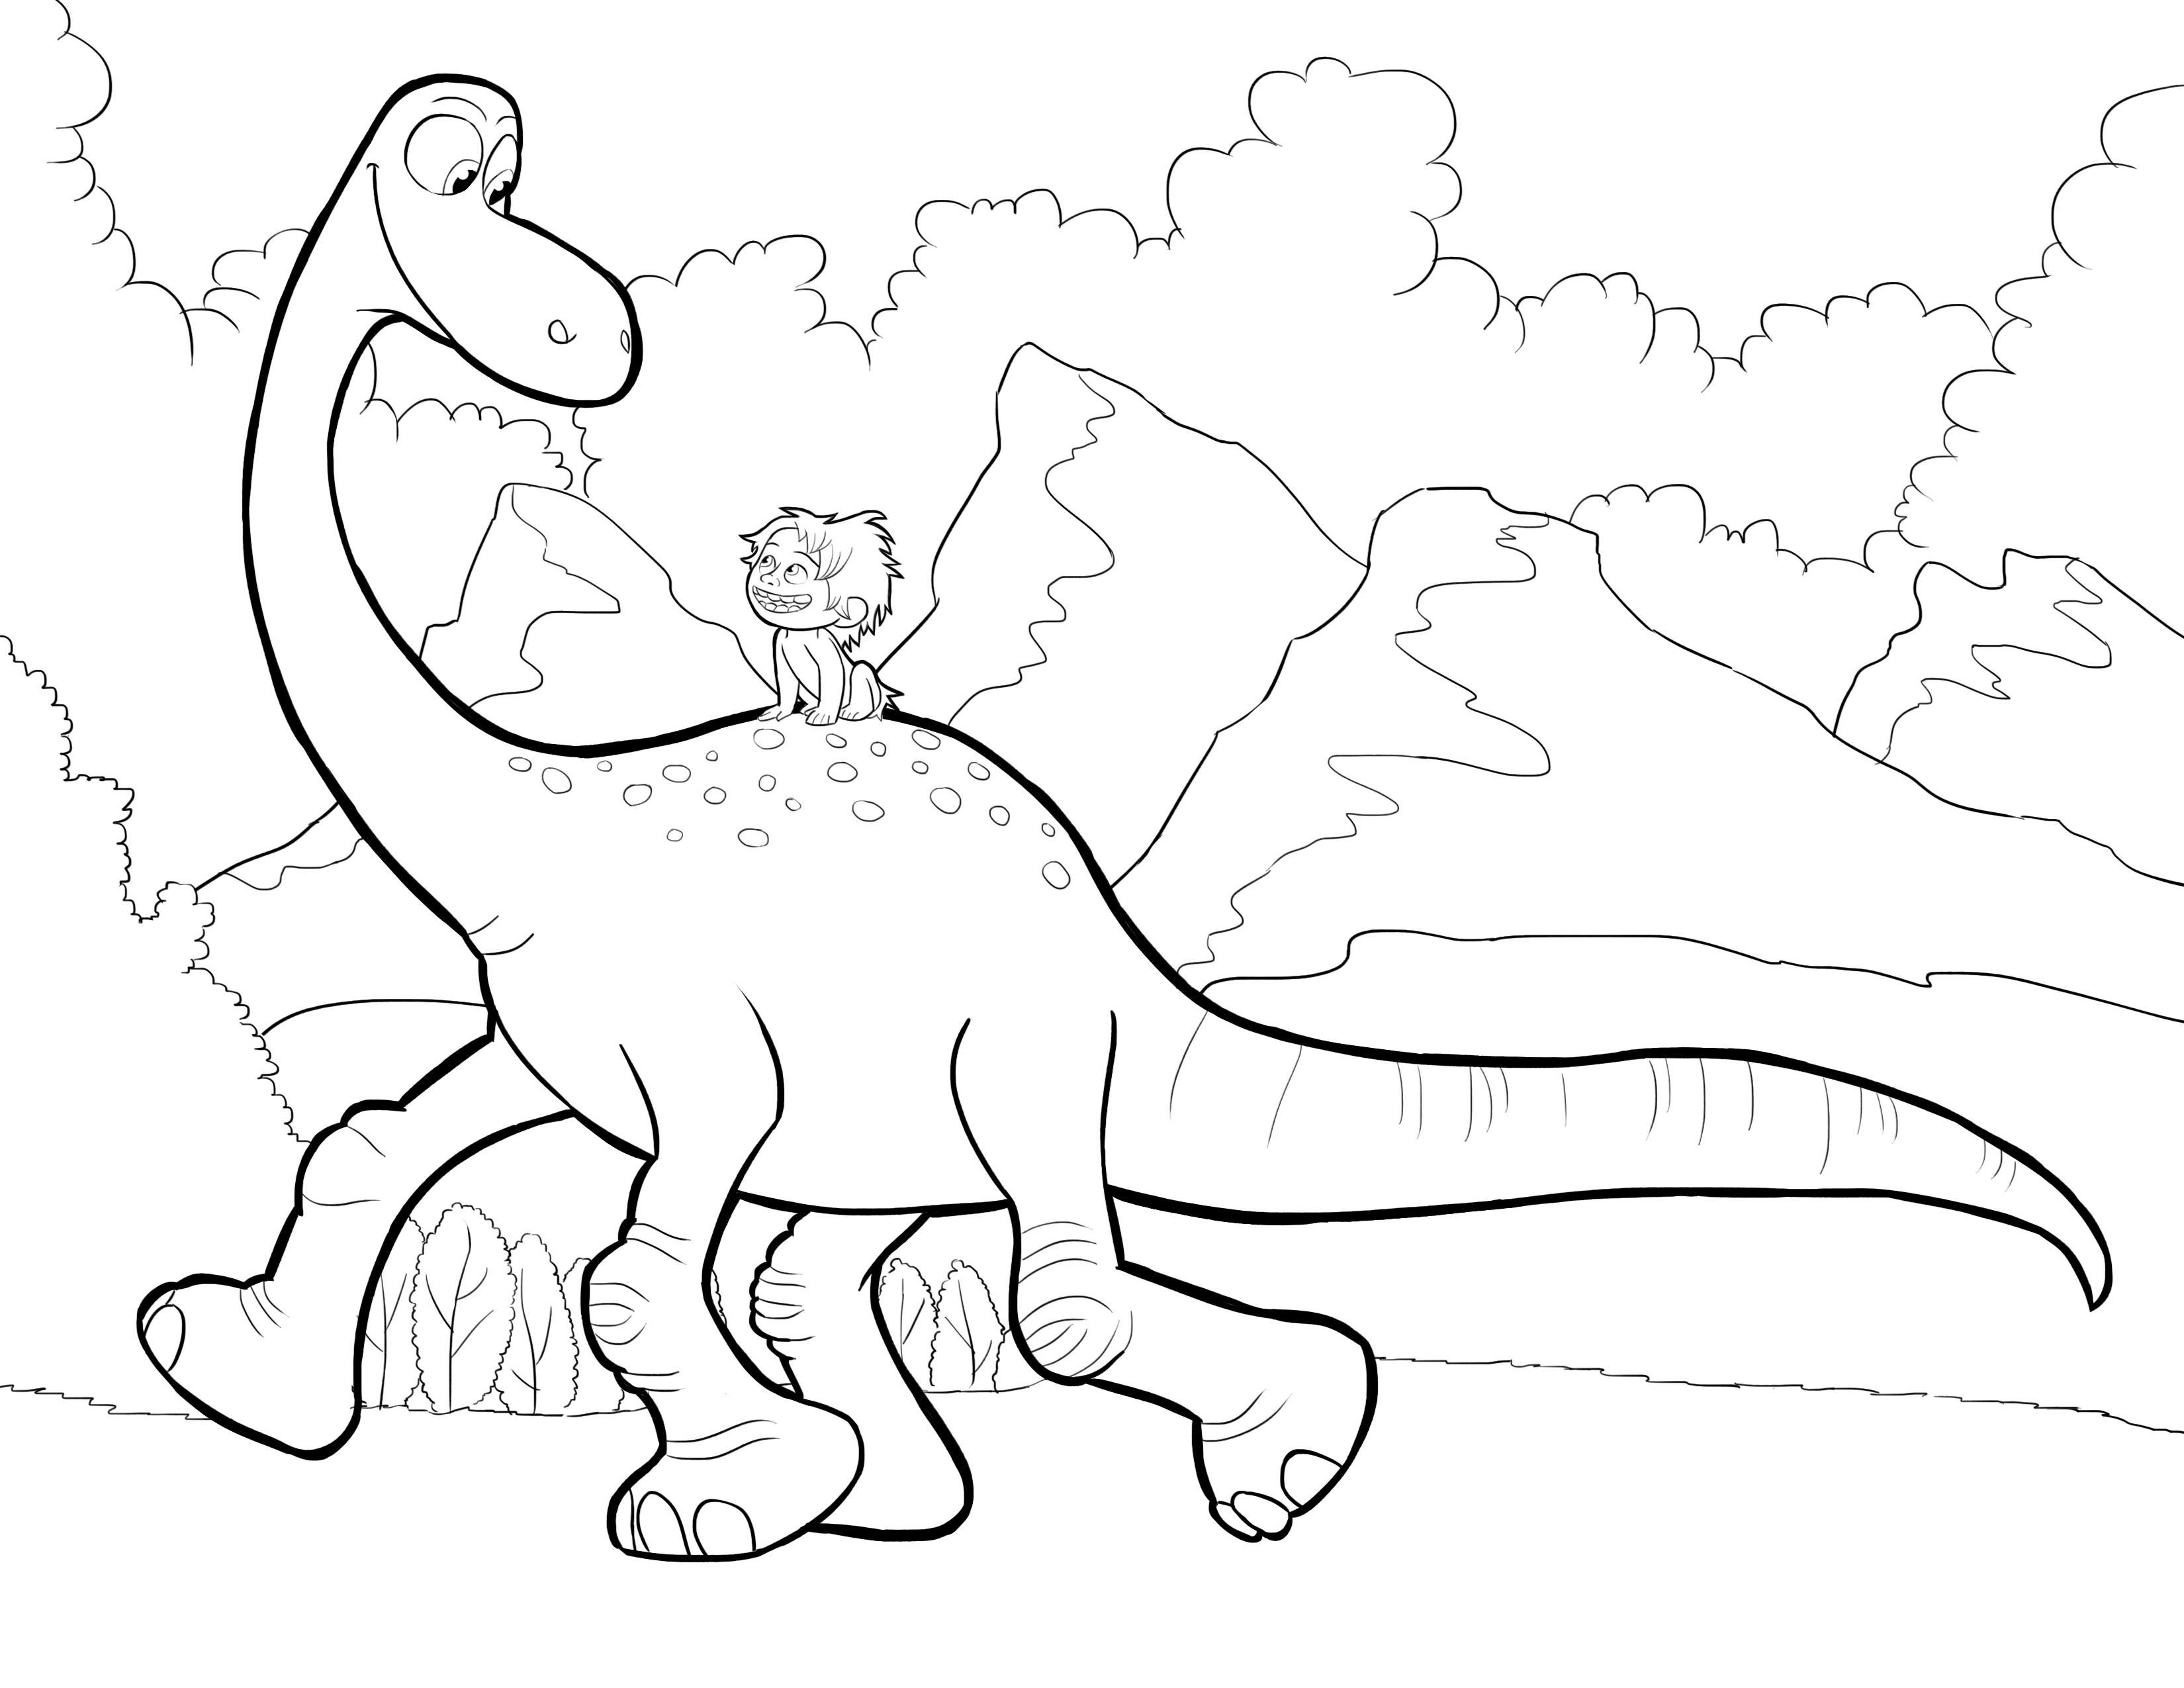 the-good-dinosaur-coloring-pages-best-coloring-pages-for-kids